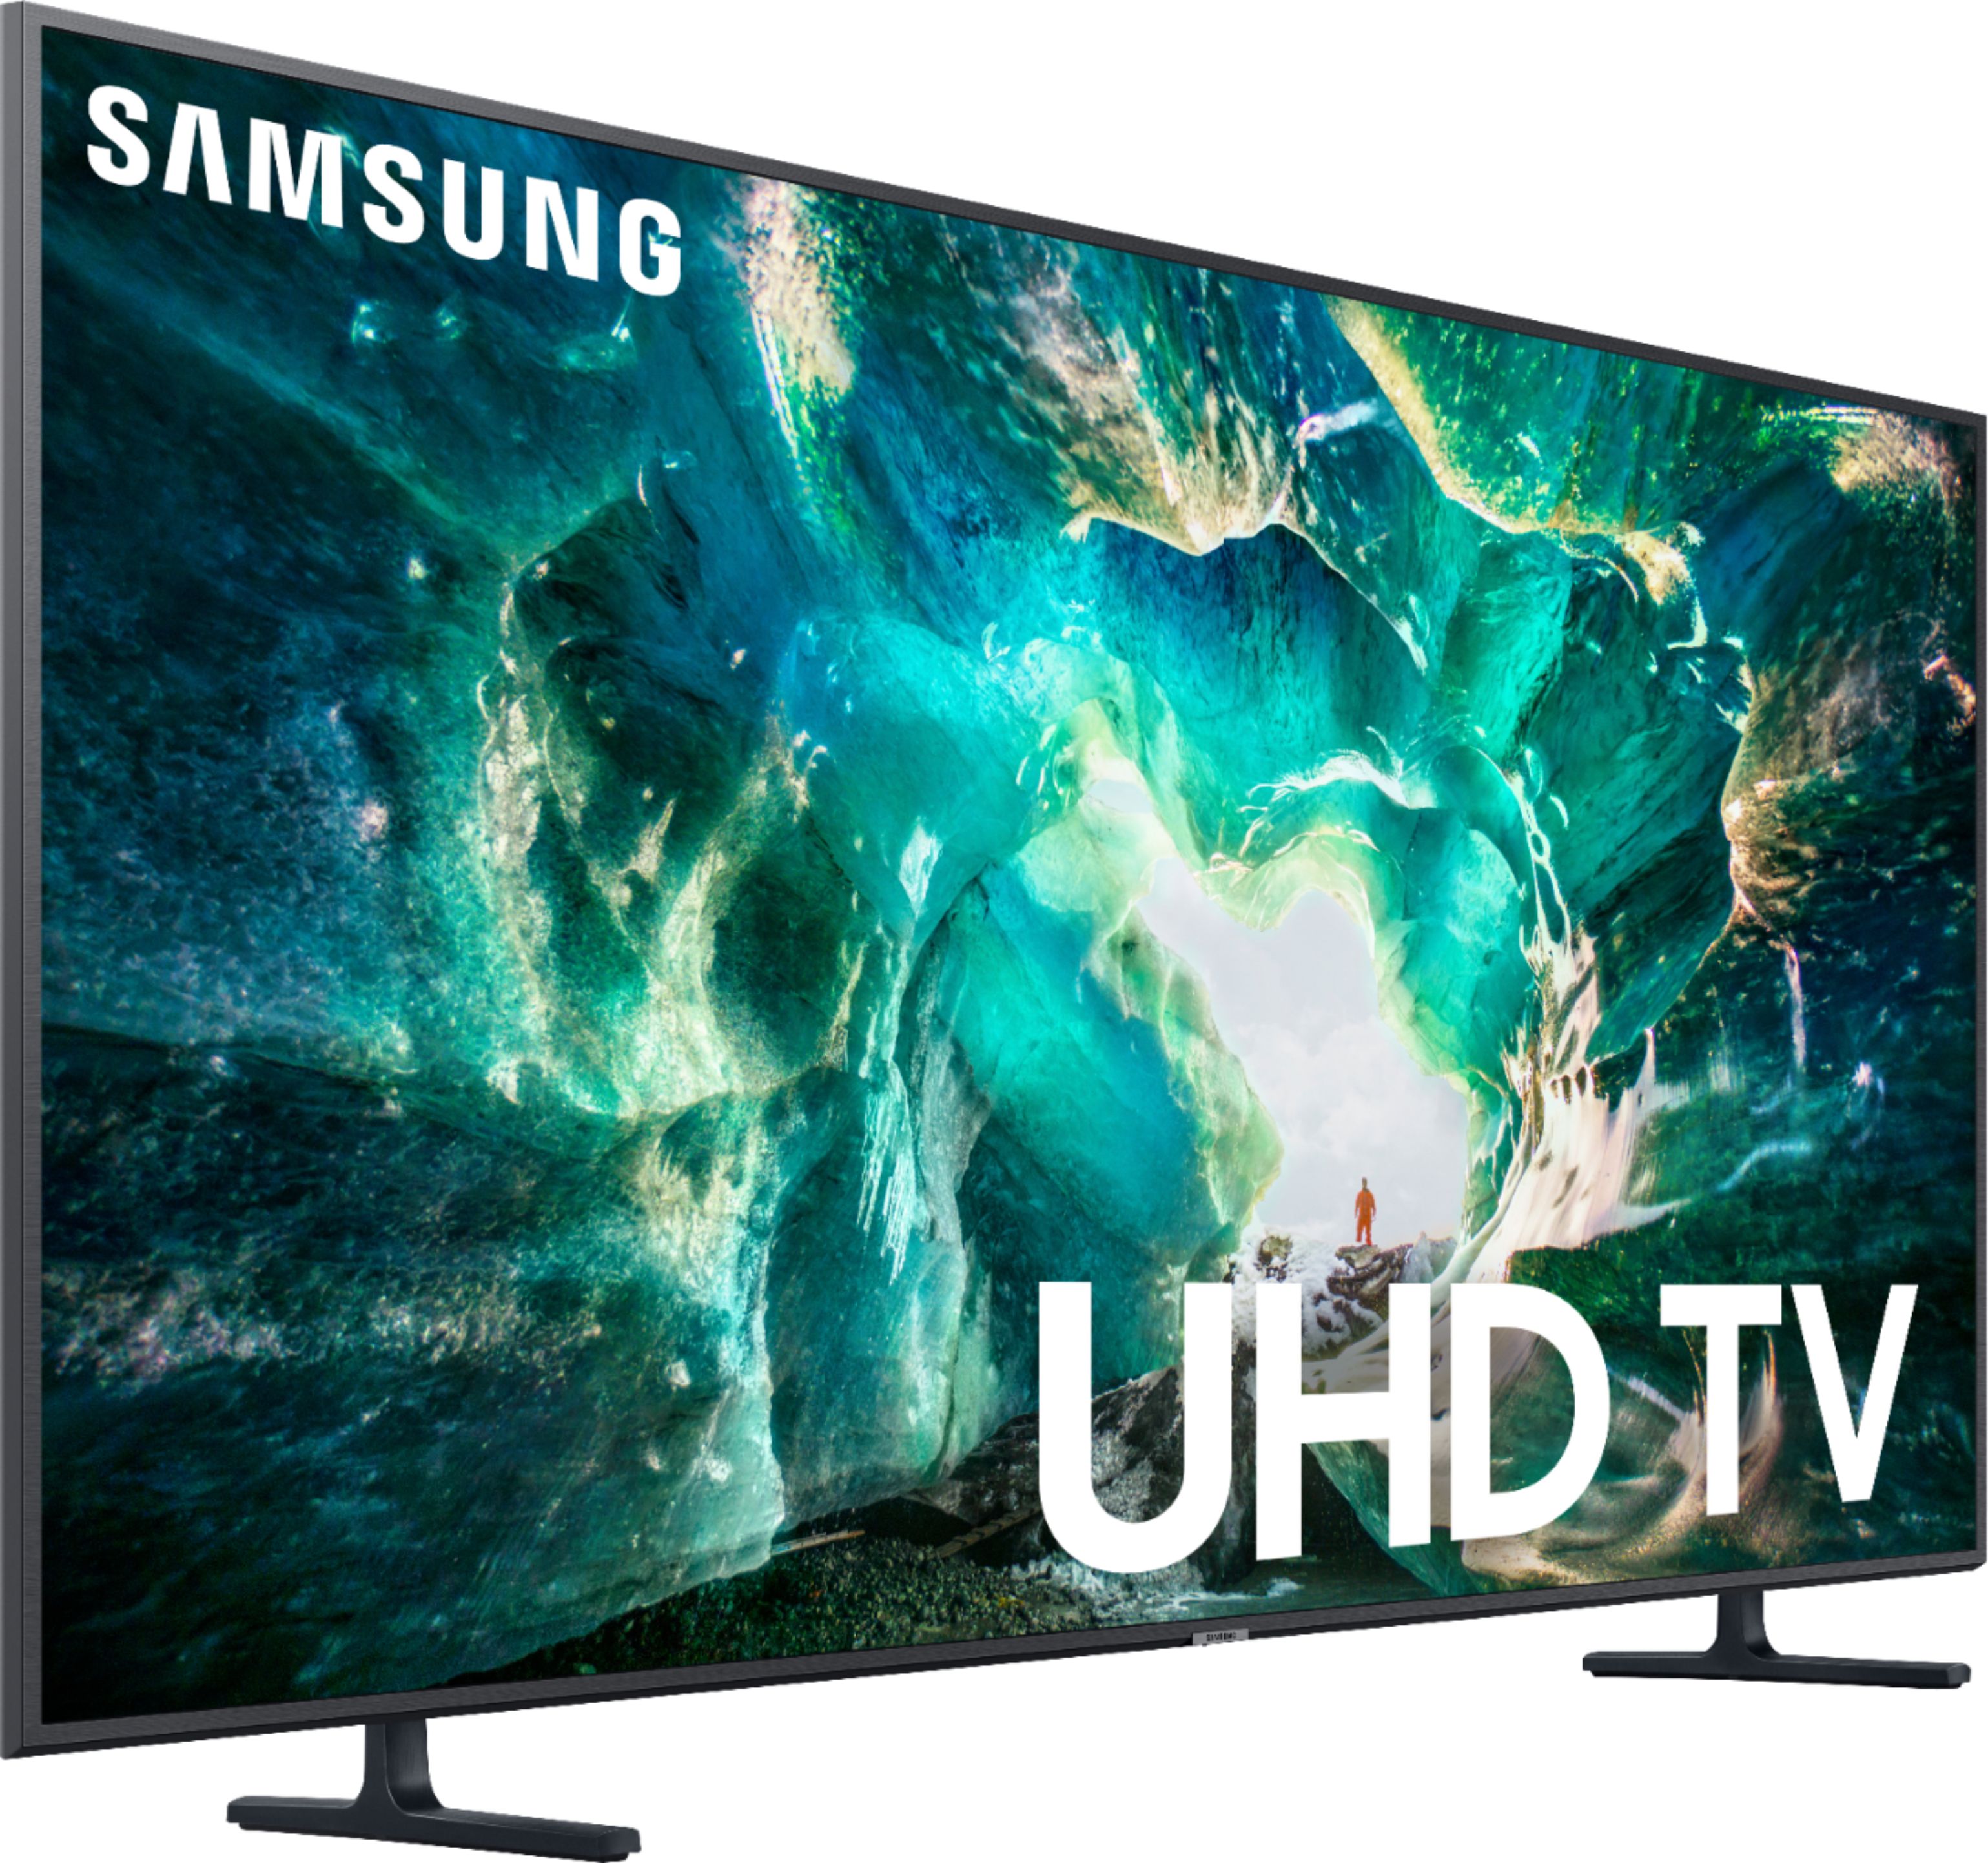 Questions and Answers Samsung 55" Class 8 Series 4K UHD TV Smart LED